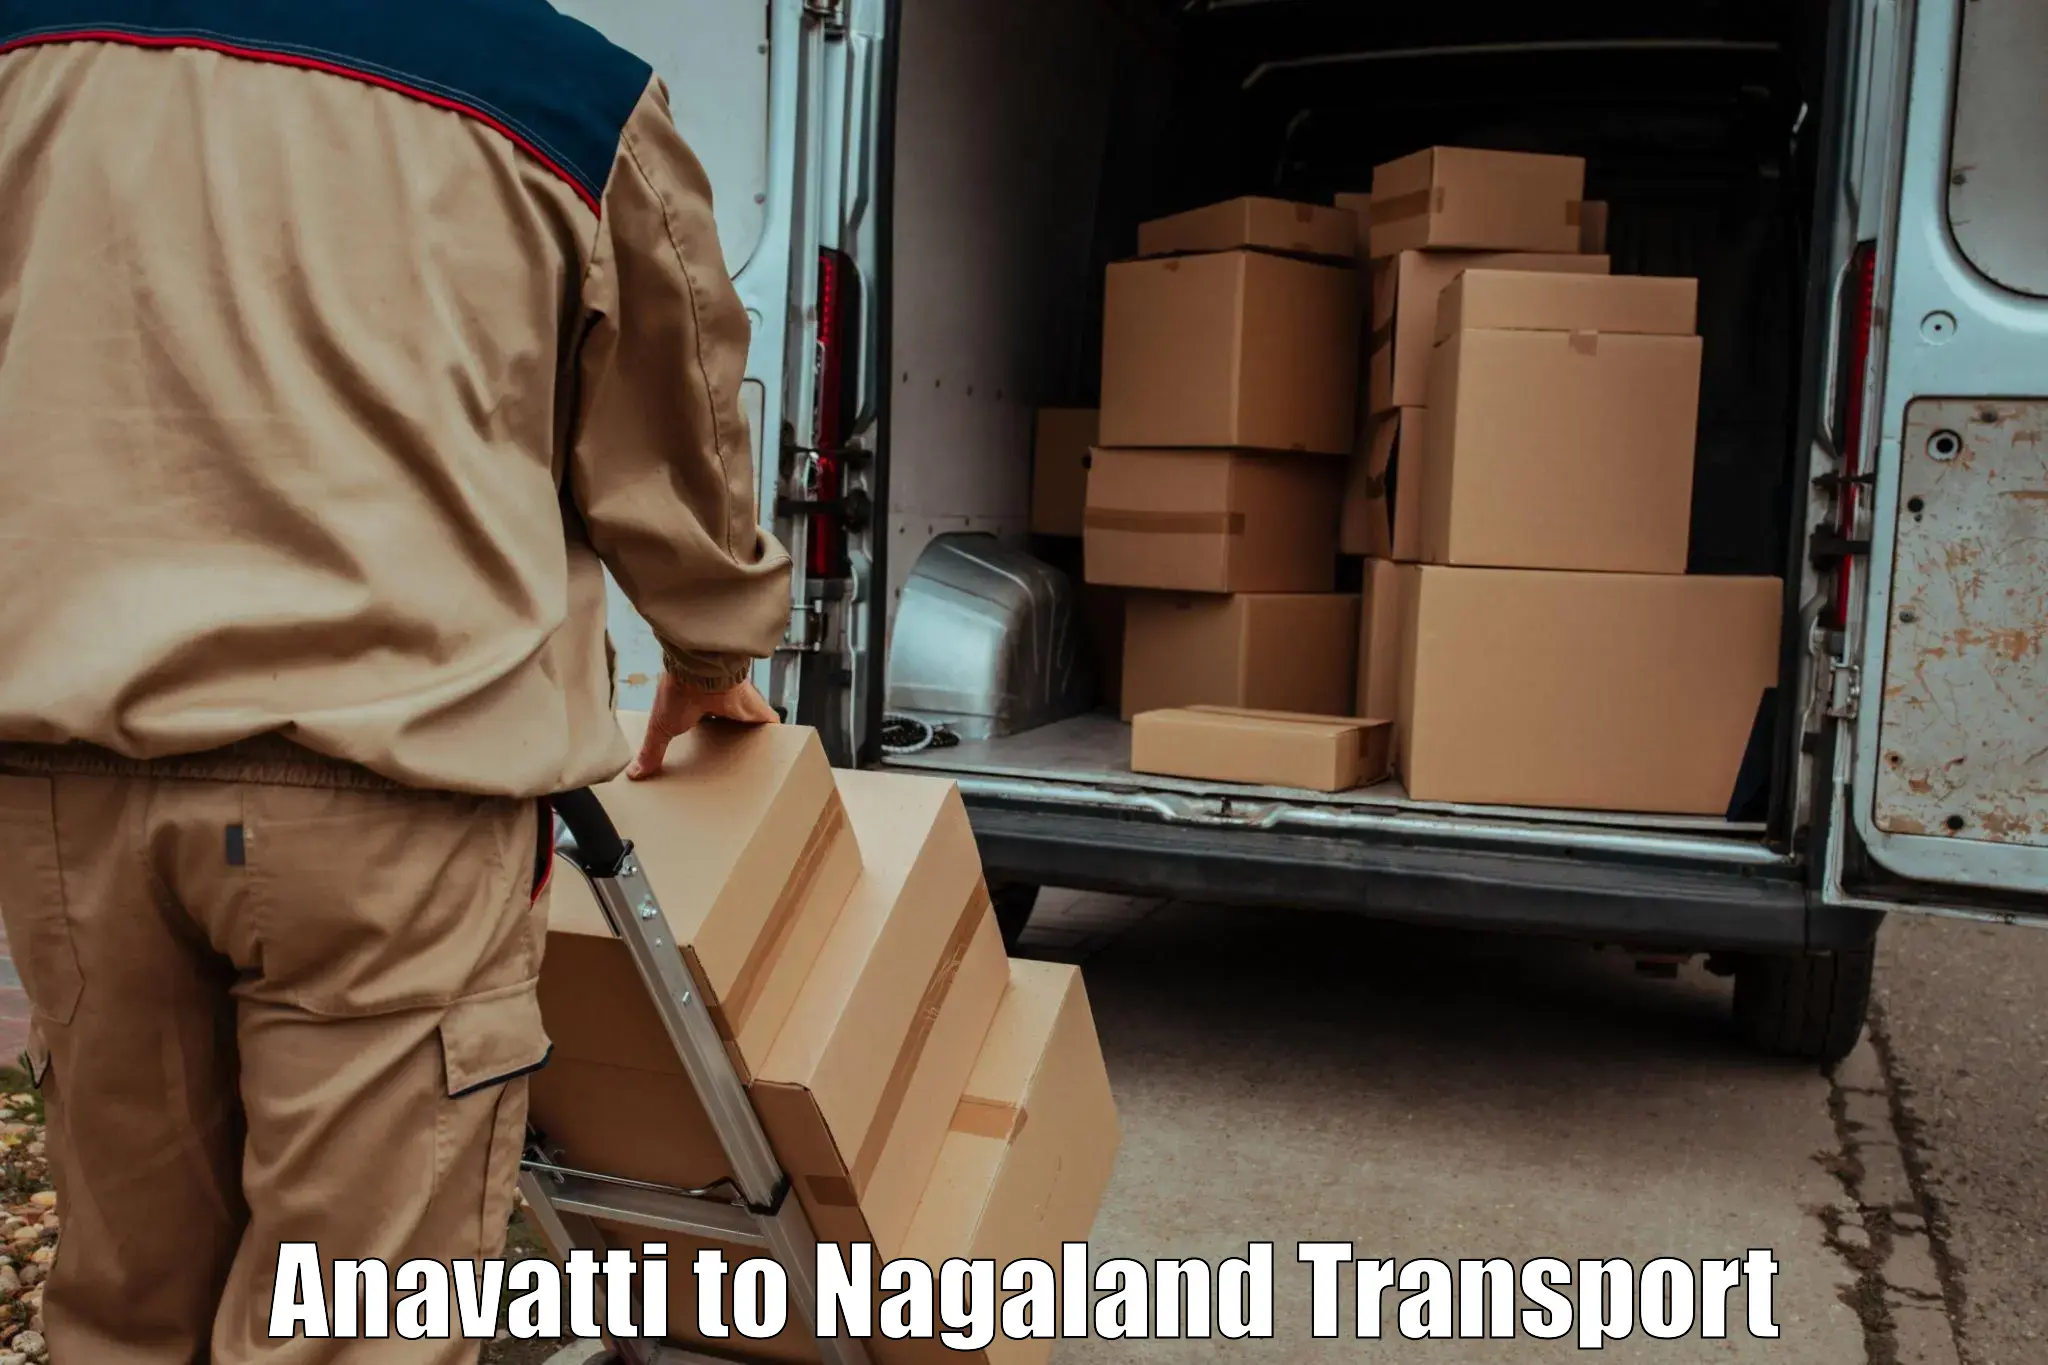 Container transport service Anavatti to Nagaland